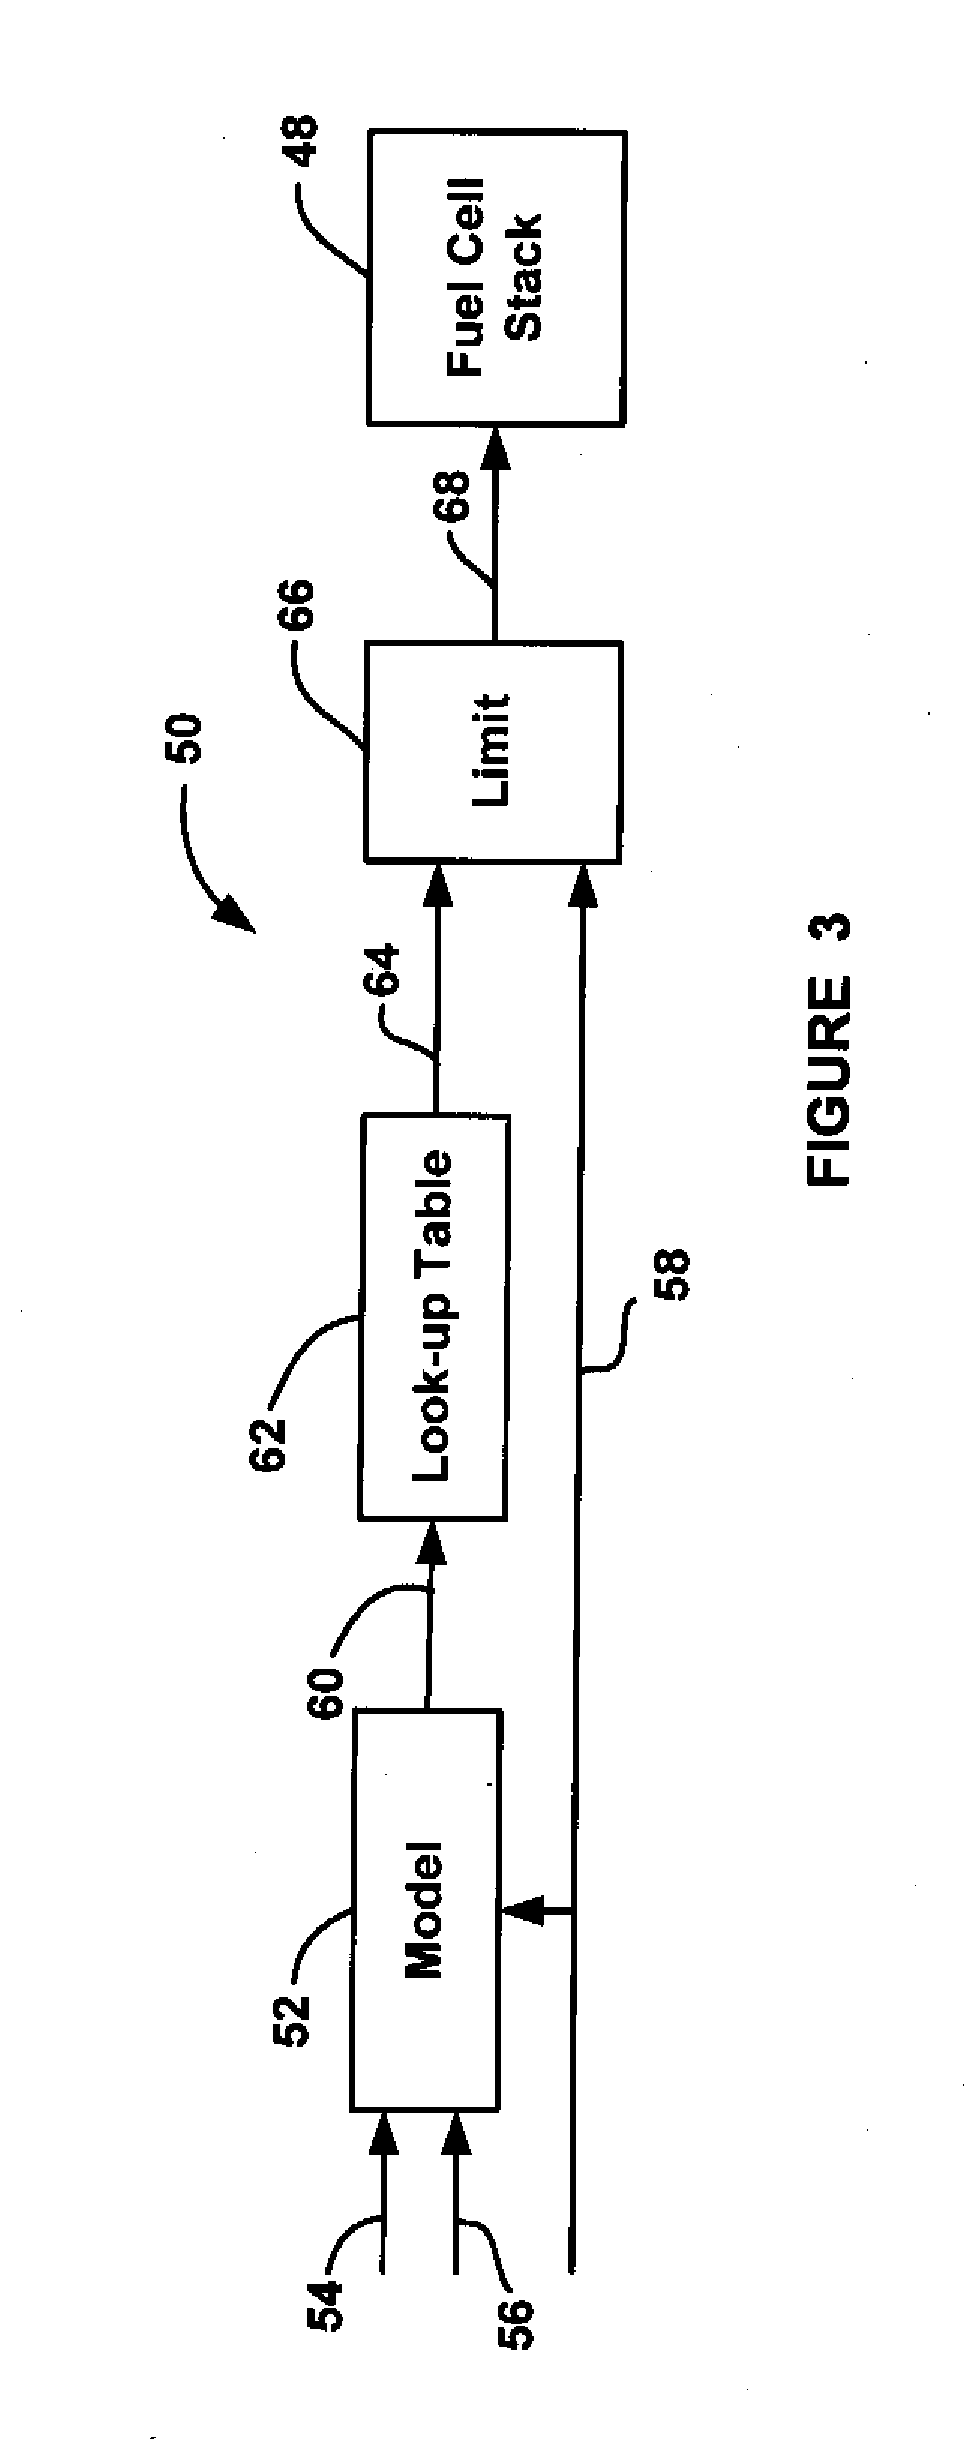 Method to improve fuel cell system performance using cell voltage prediction of fuel cell stack